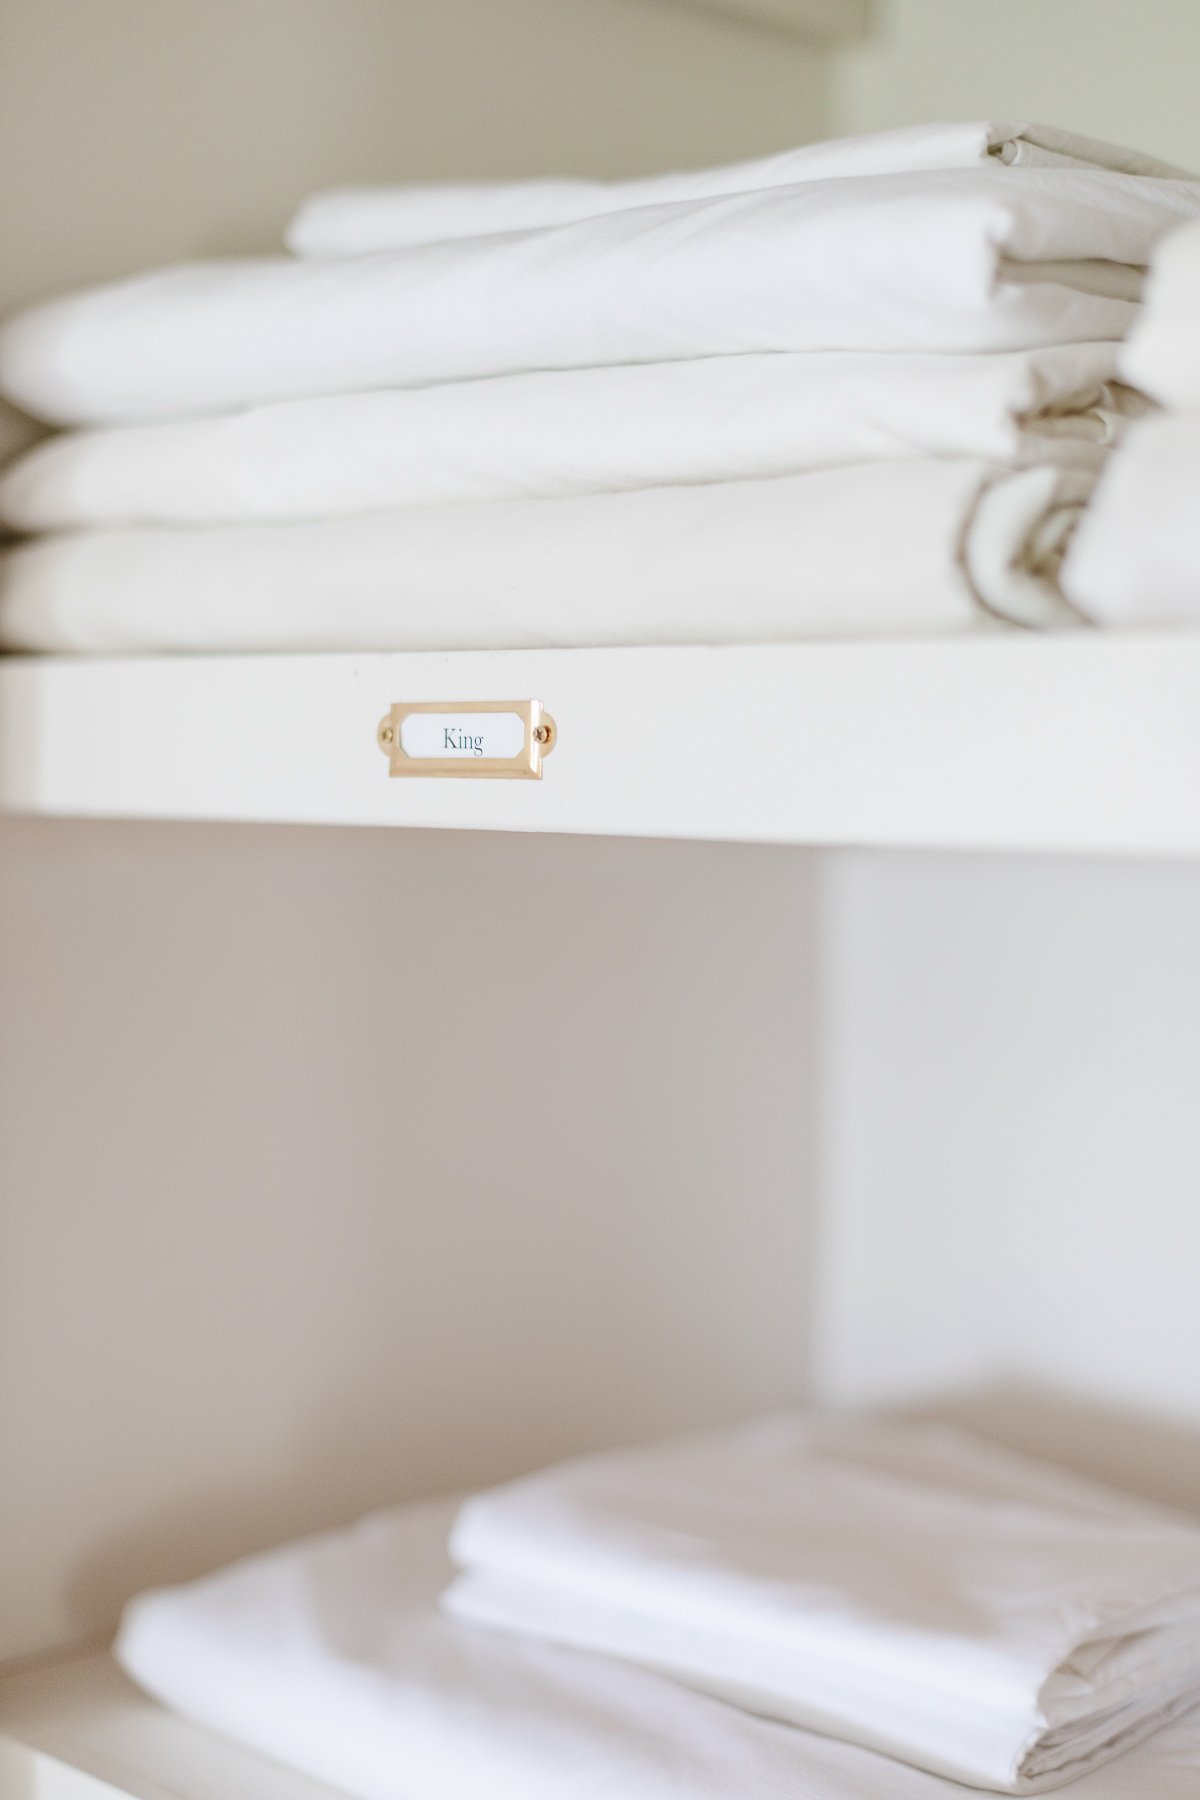 White sheets neatly stored in a linen closet.